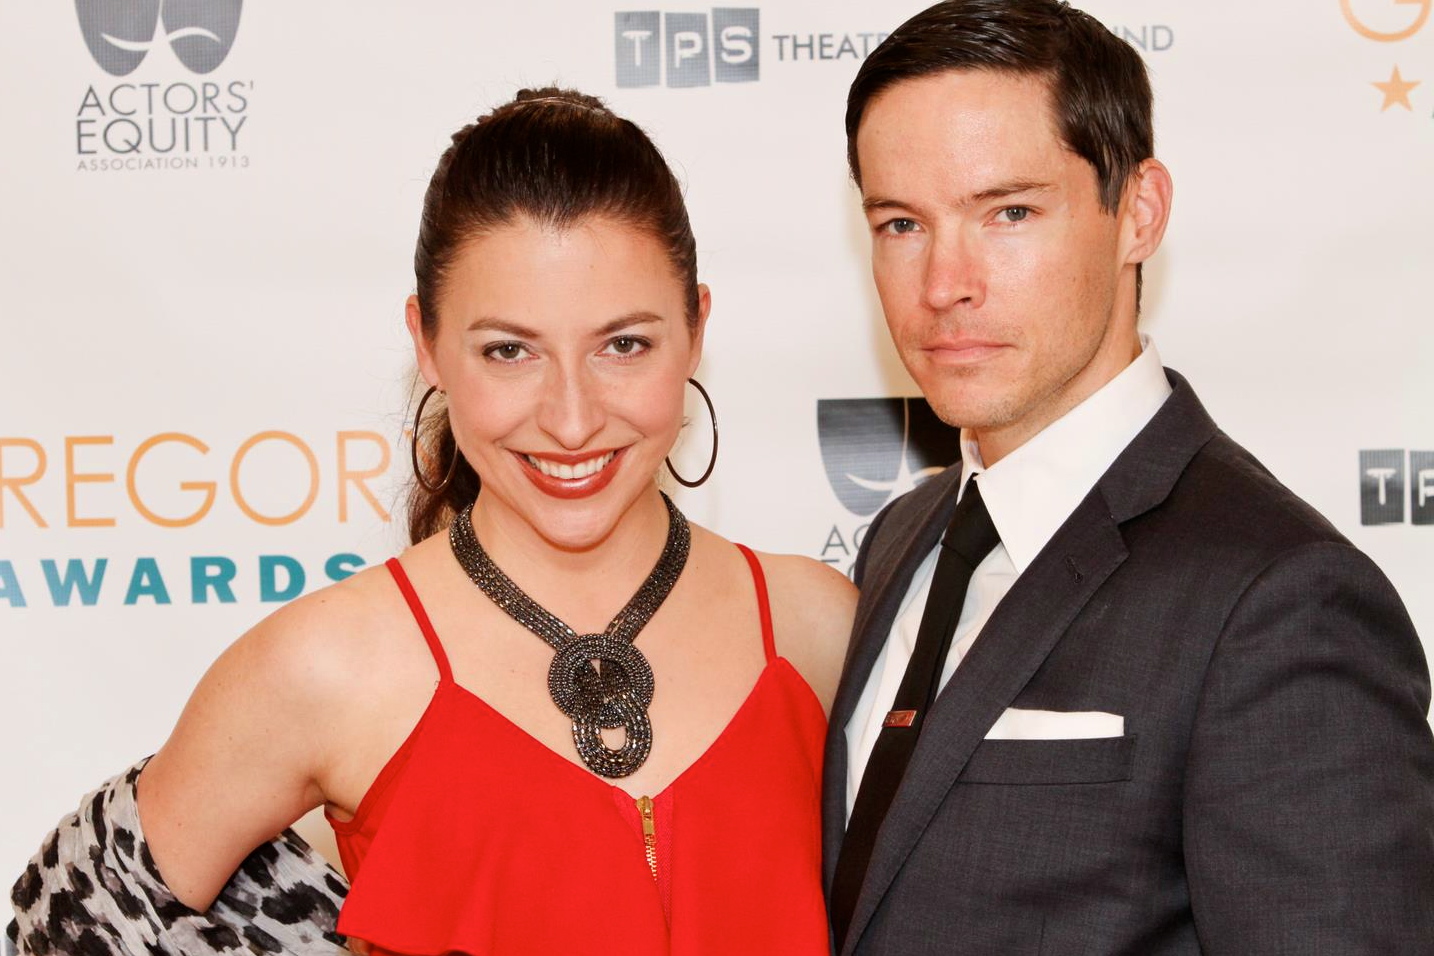 Angela DiMarco and David on the red carpet at the 2012 Gregory Awards.